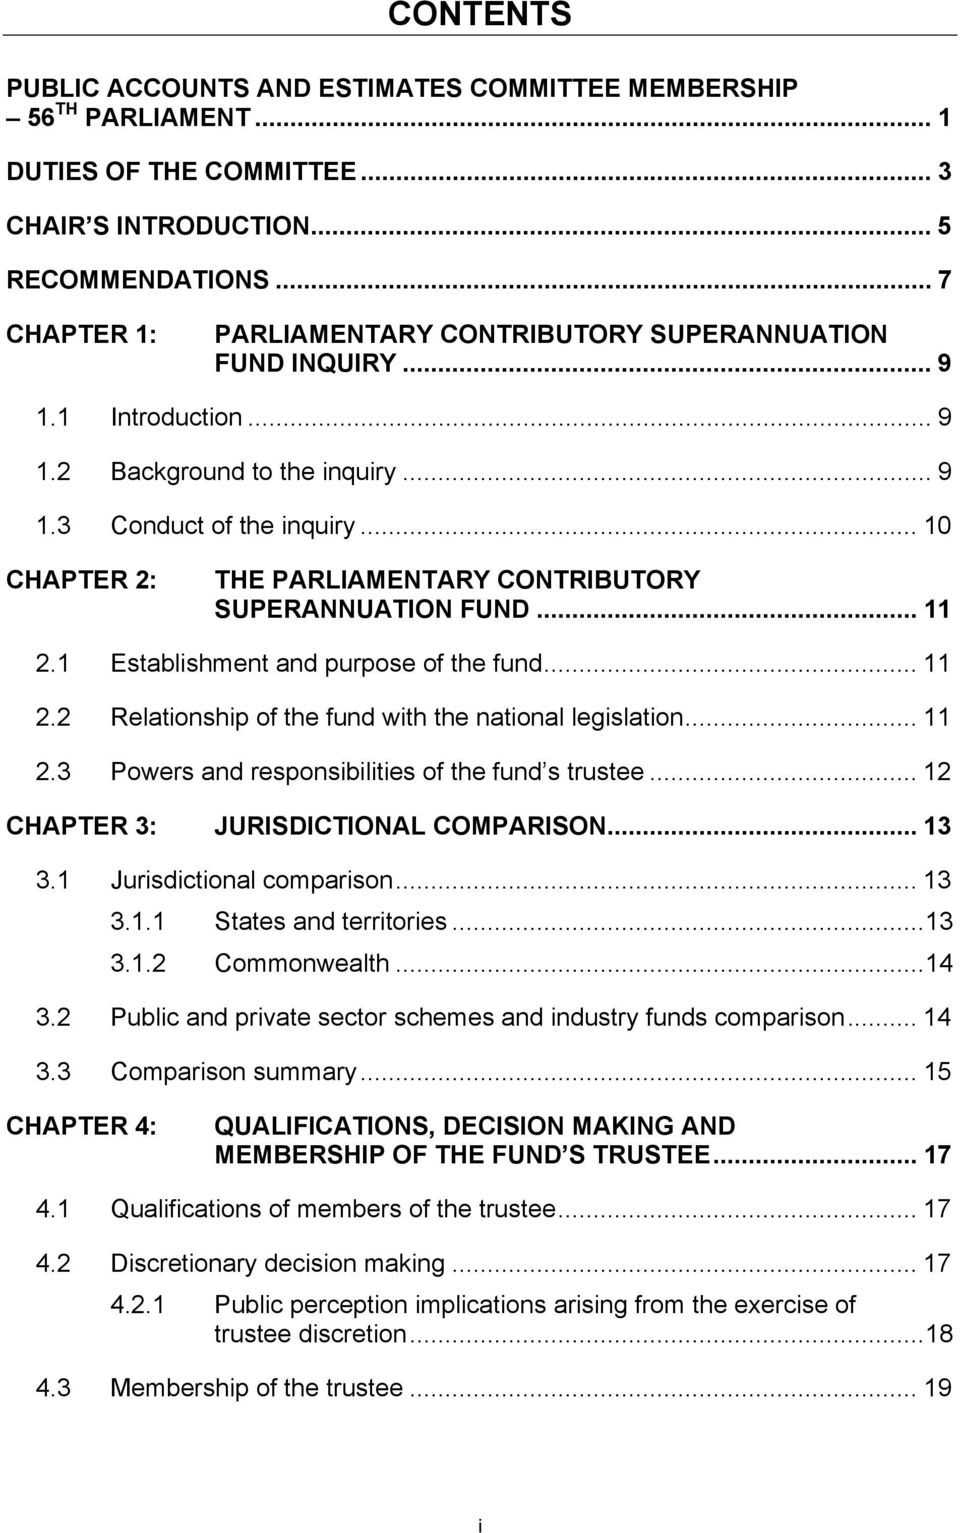 .. 10 CHAPTER 2: THE PARLIAMENTARY CONTRIBUTORY SUPERANNUATION FUND... 11 2.1 Establishment and purpose of the fund... 11 2.2 Relationship of the fund with the national legislation... 11 2.3 Powers and responsibilities of the fund s trustee.